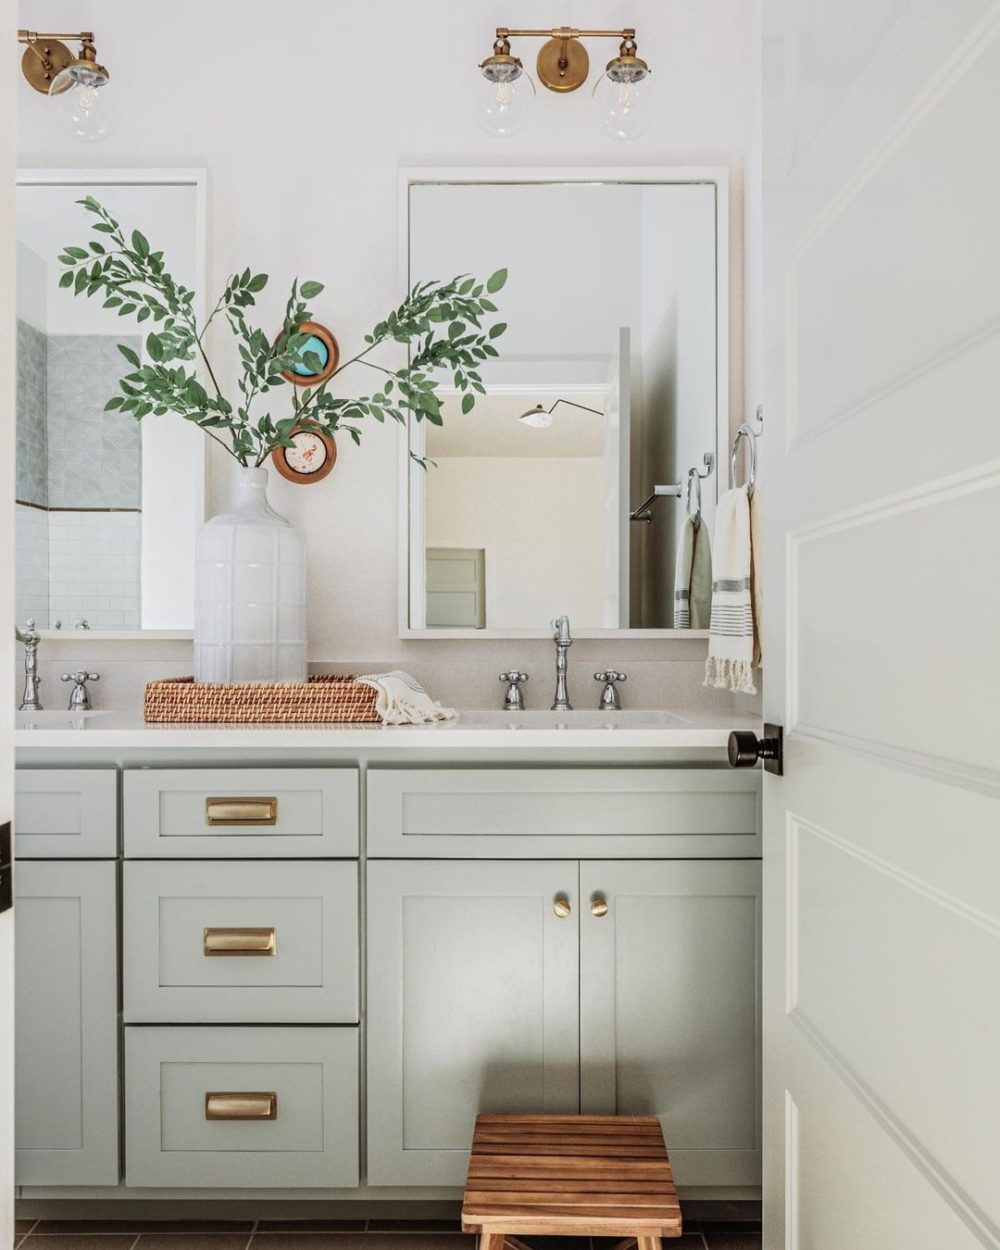 A Simple Guide to Mixing Metals in the Bathroom – jane at home